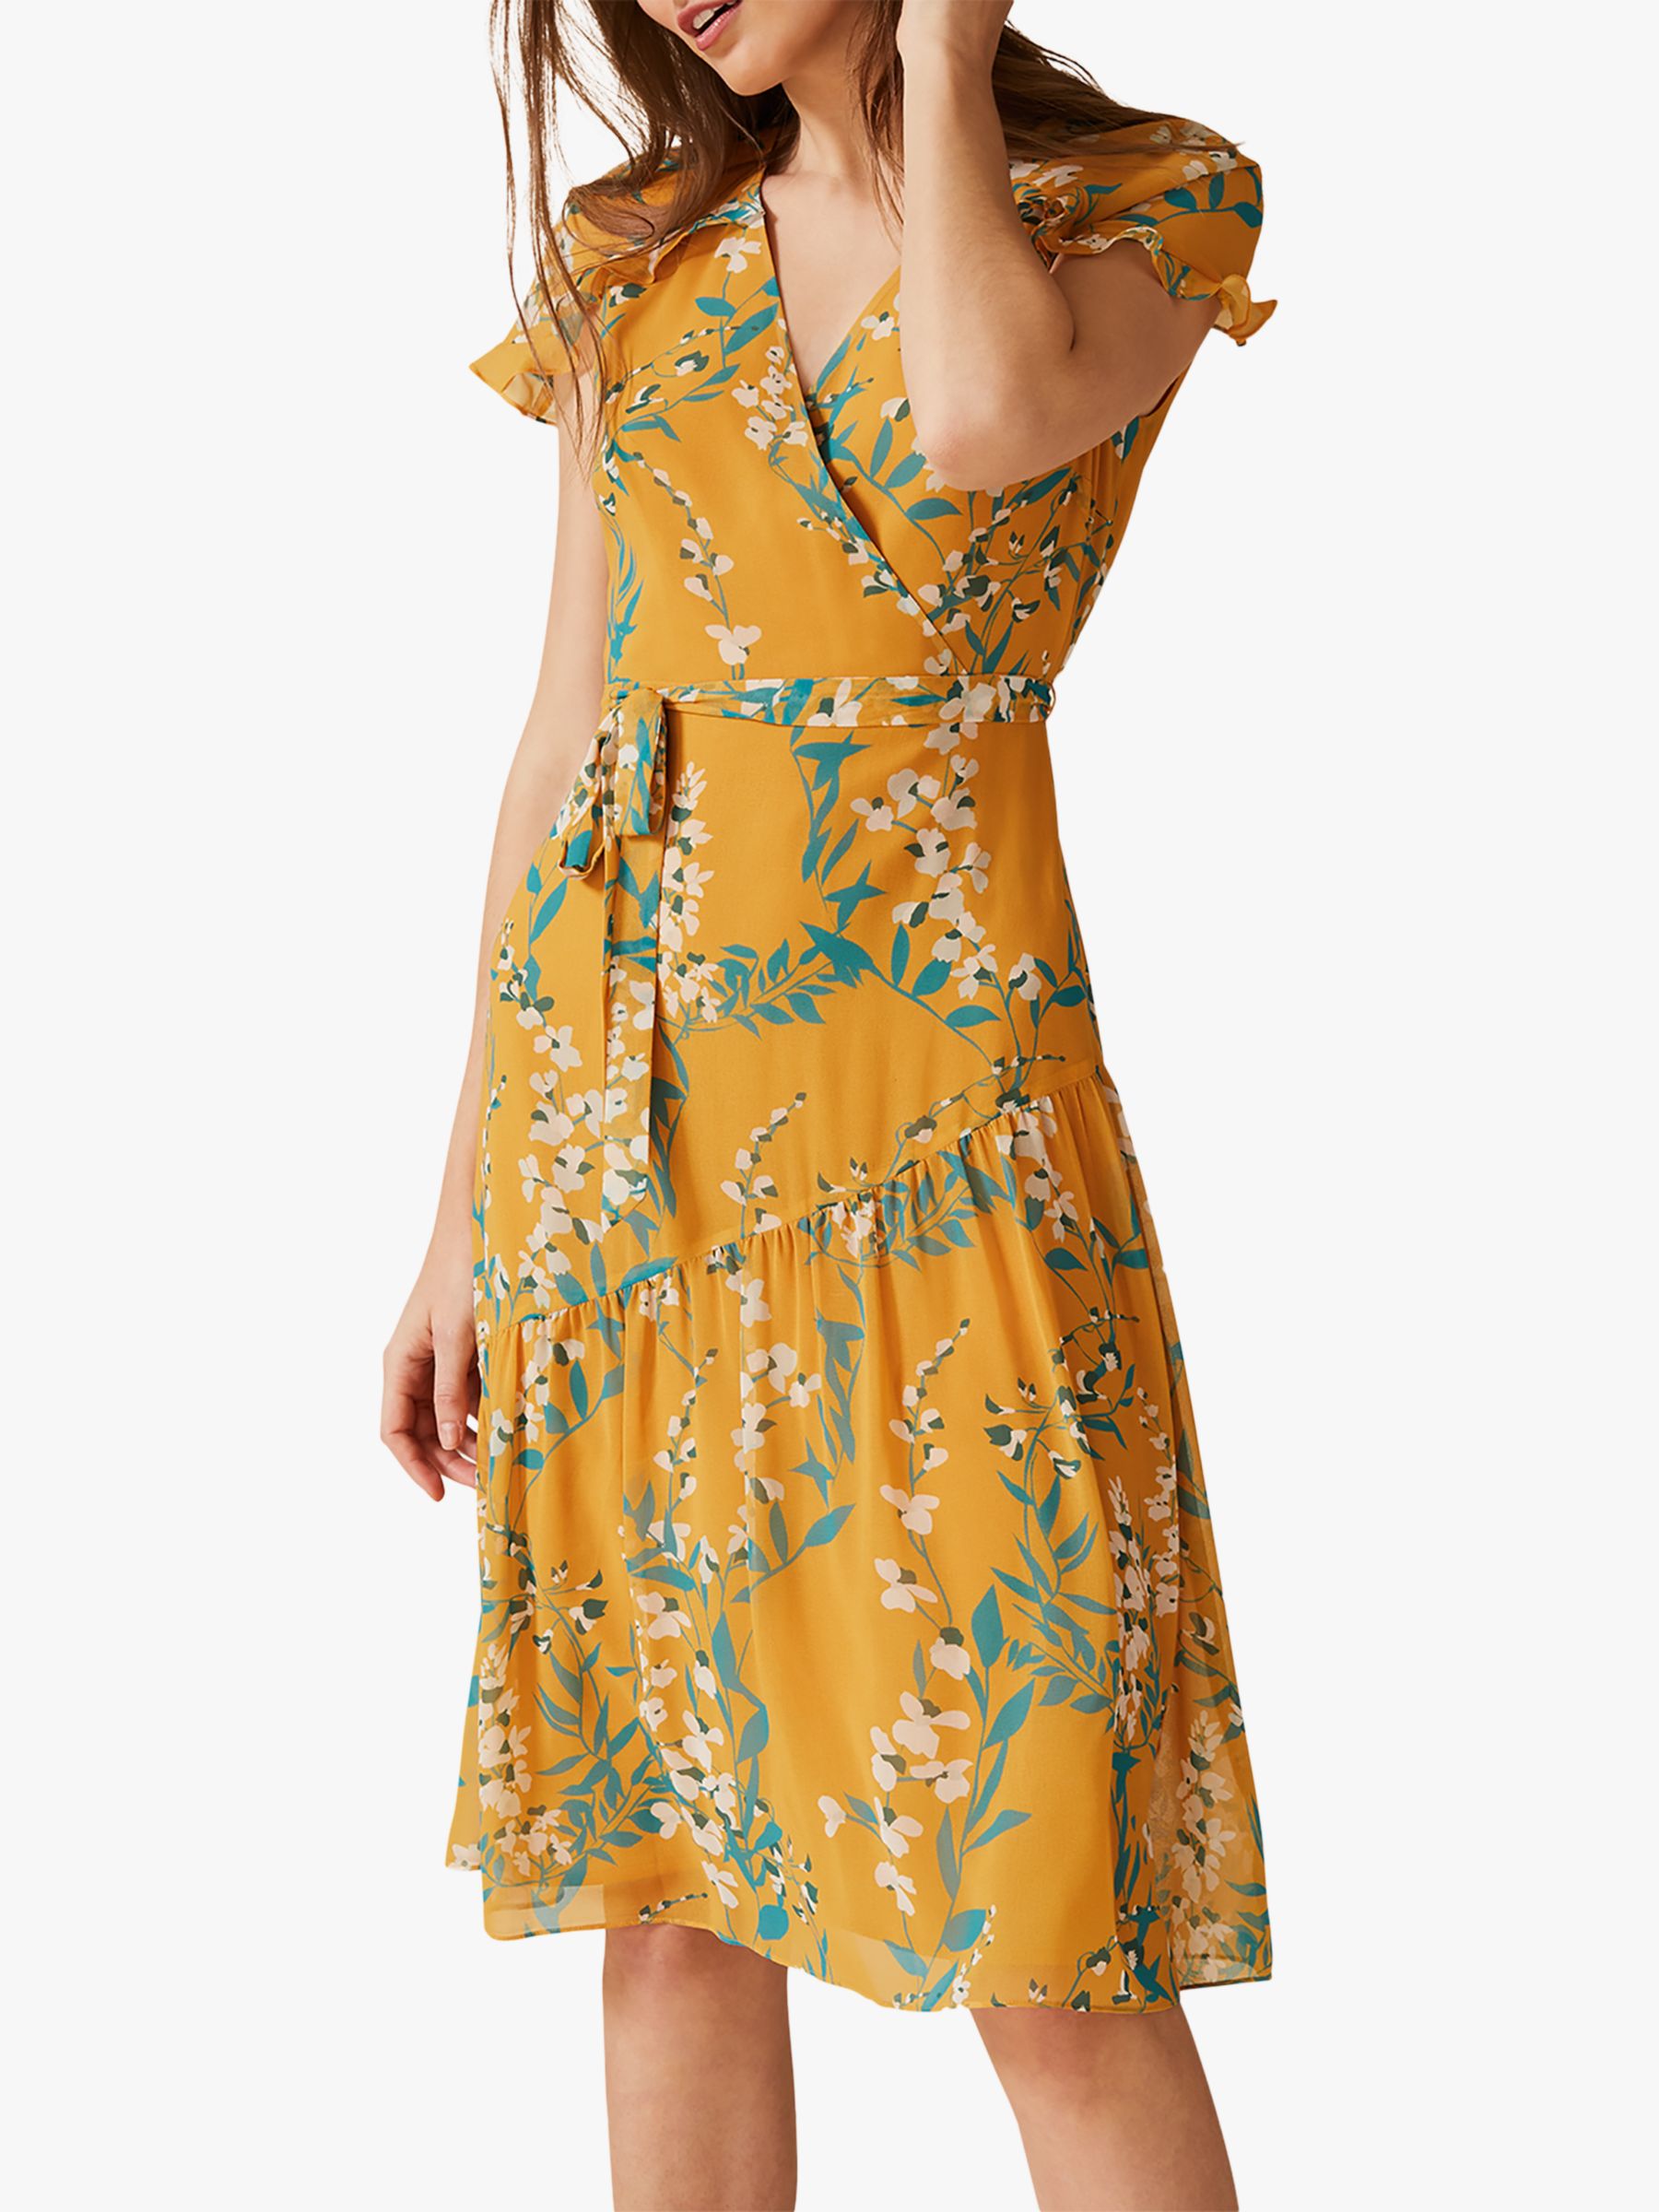 Phase Eight Eloisa Ruffle Detail Floral Dress, Apricot